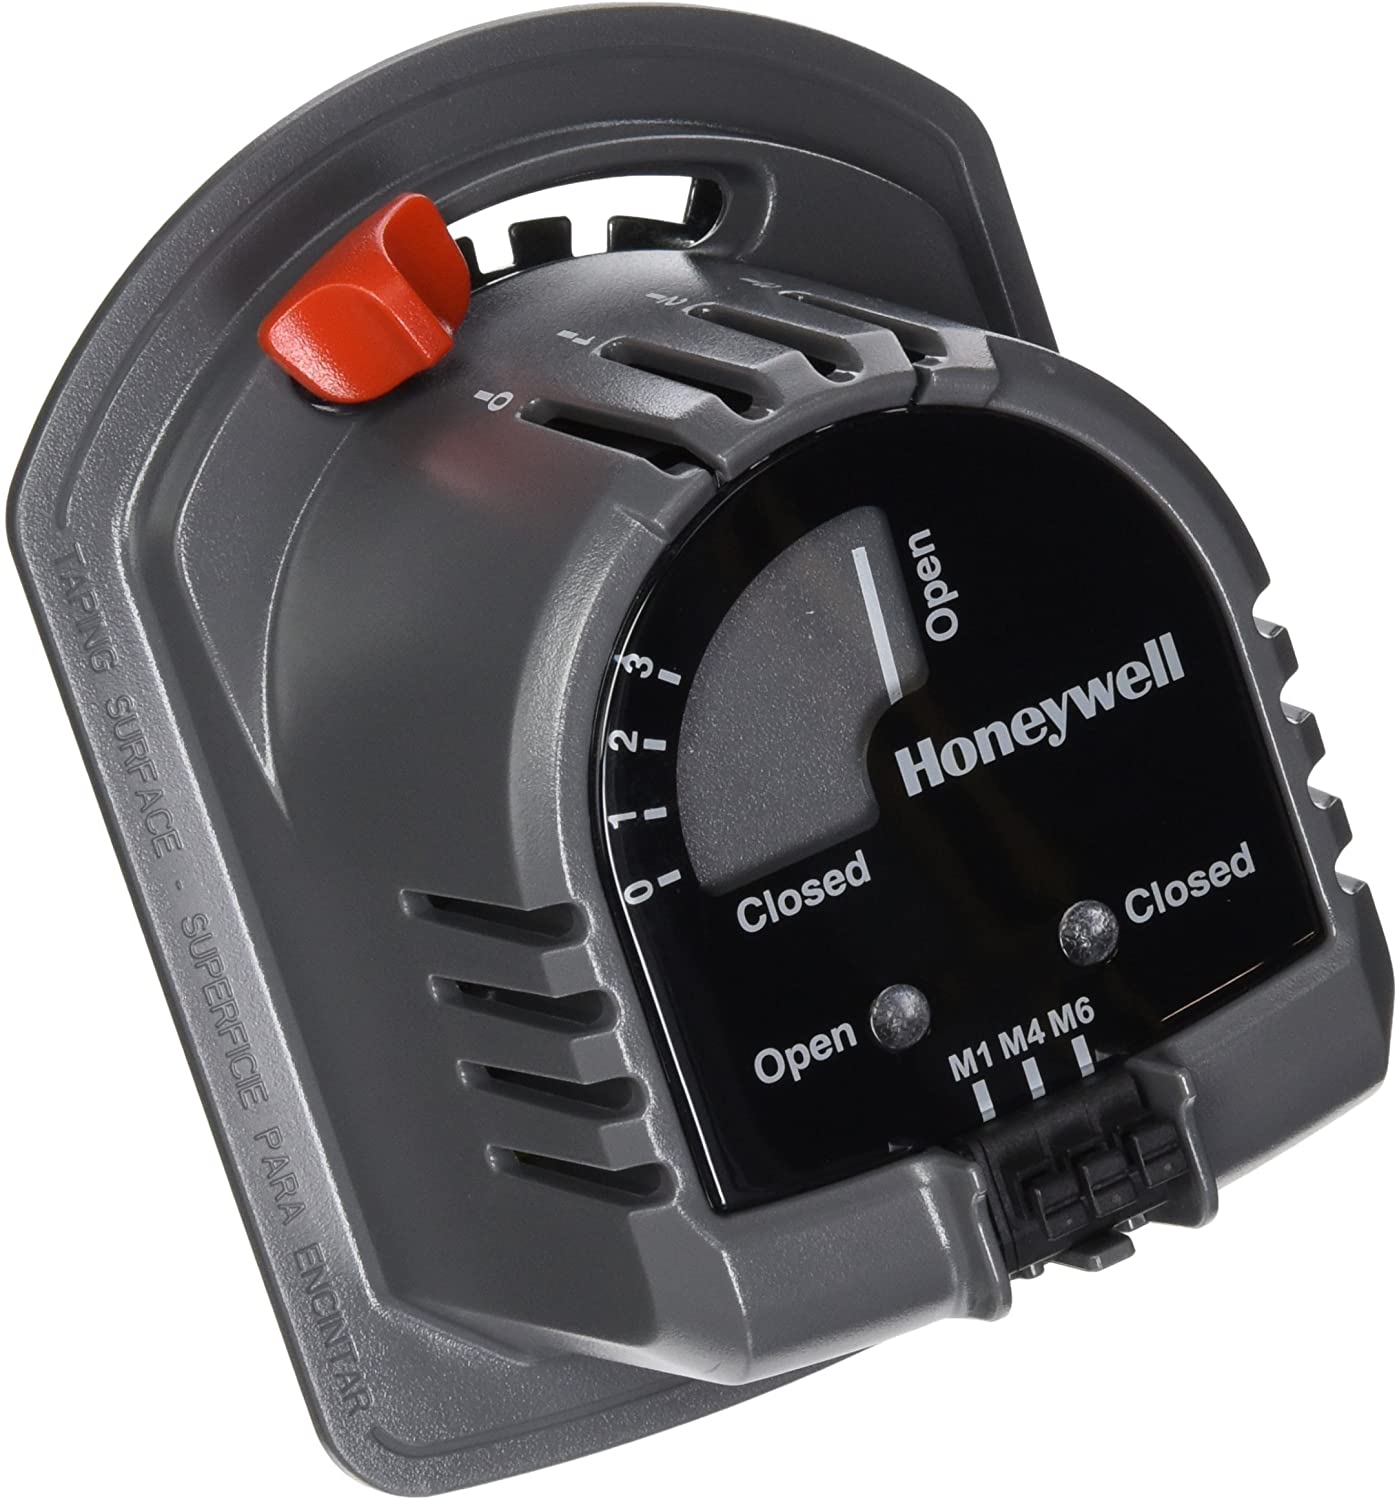 Honeywell M847D-ZONE/U Replacement Motor for Ard and Zd Zone Dampers, 24V